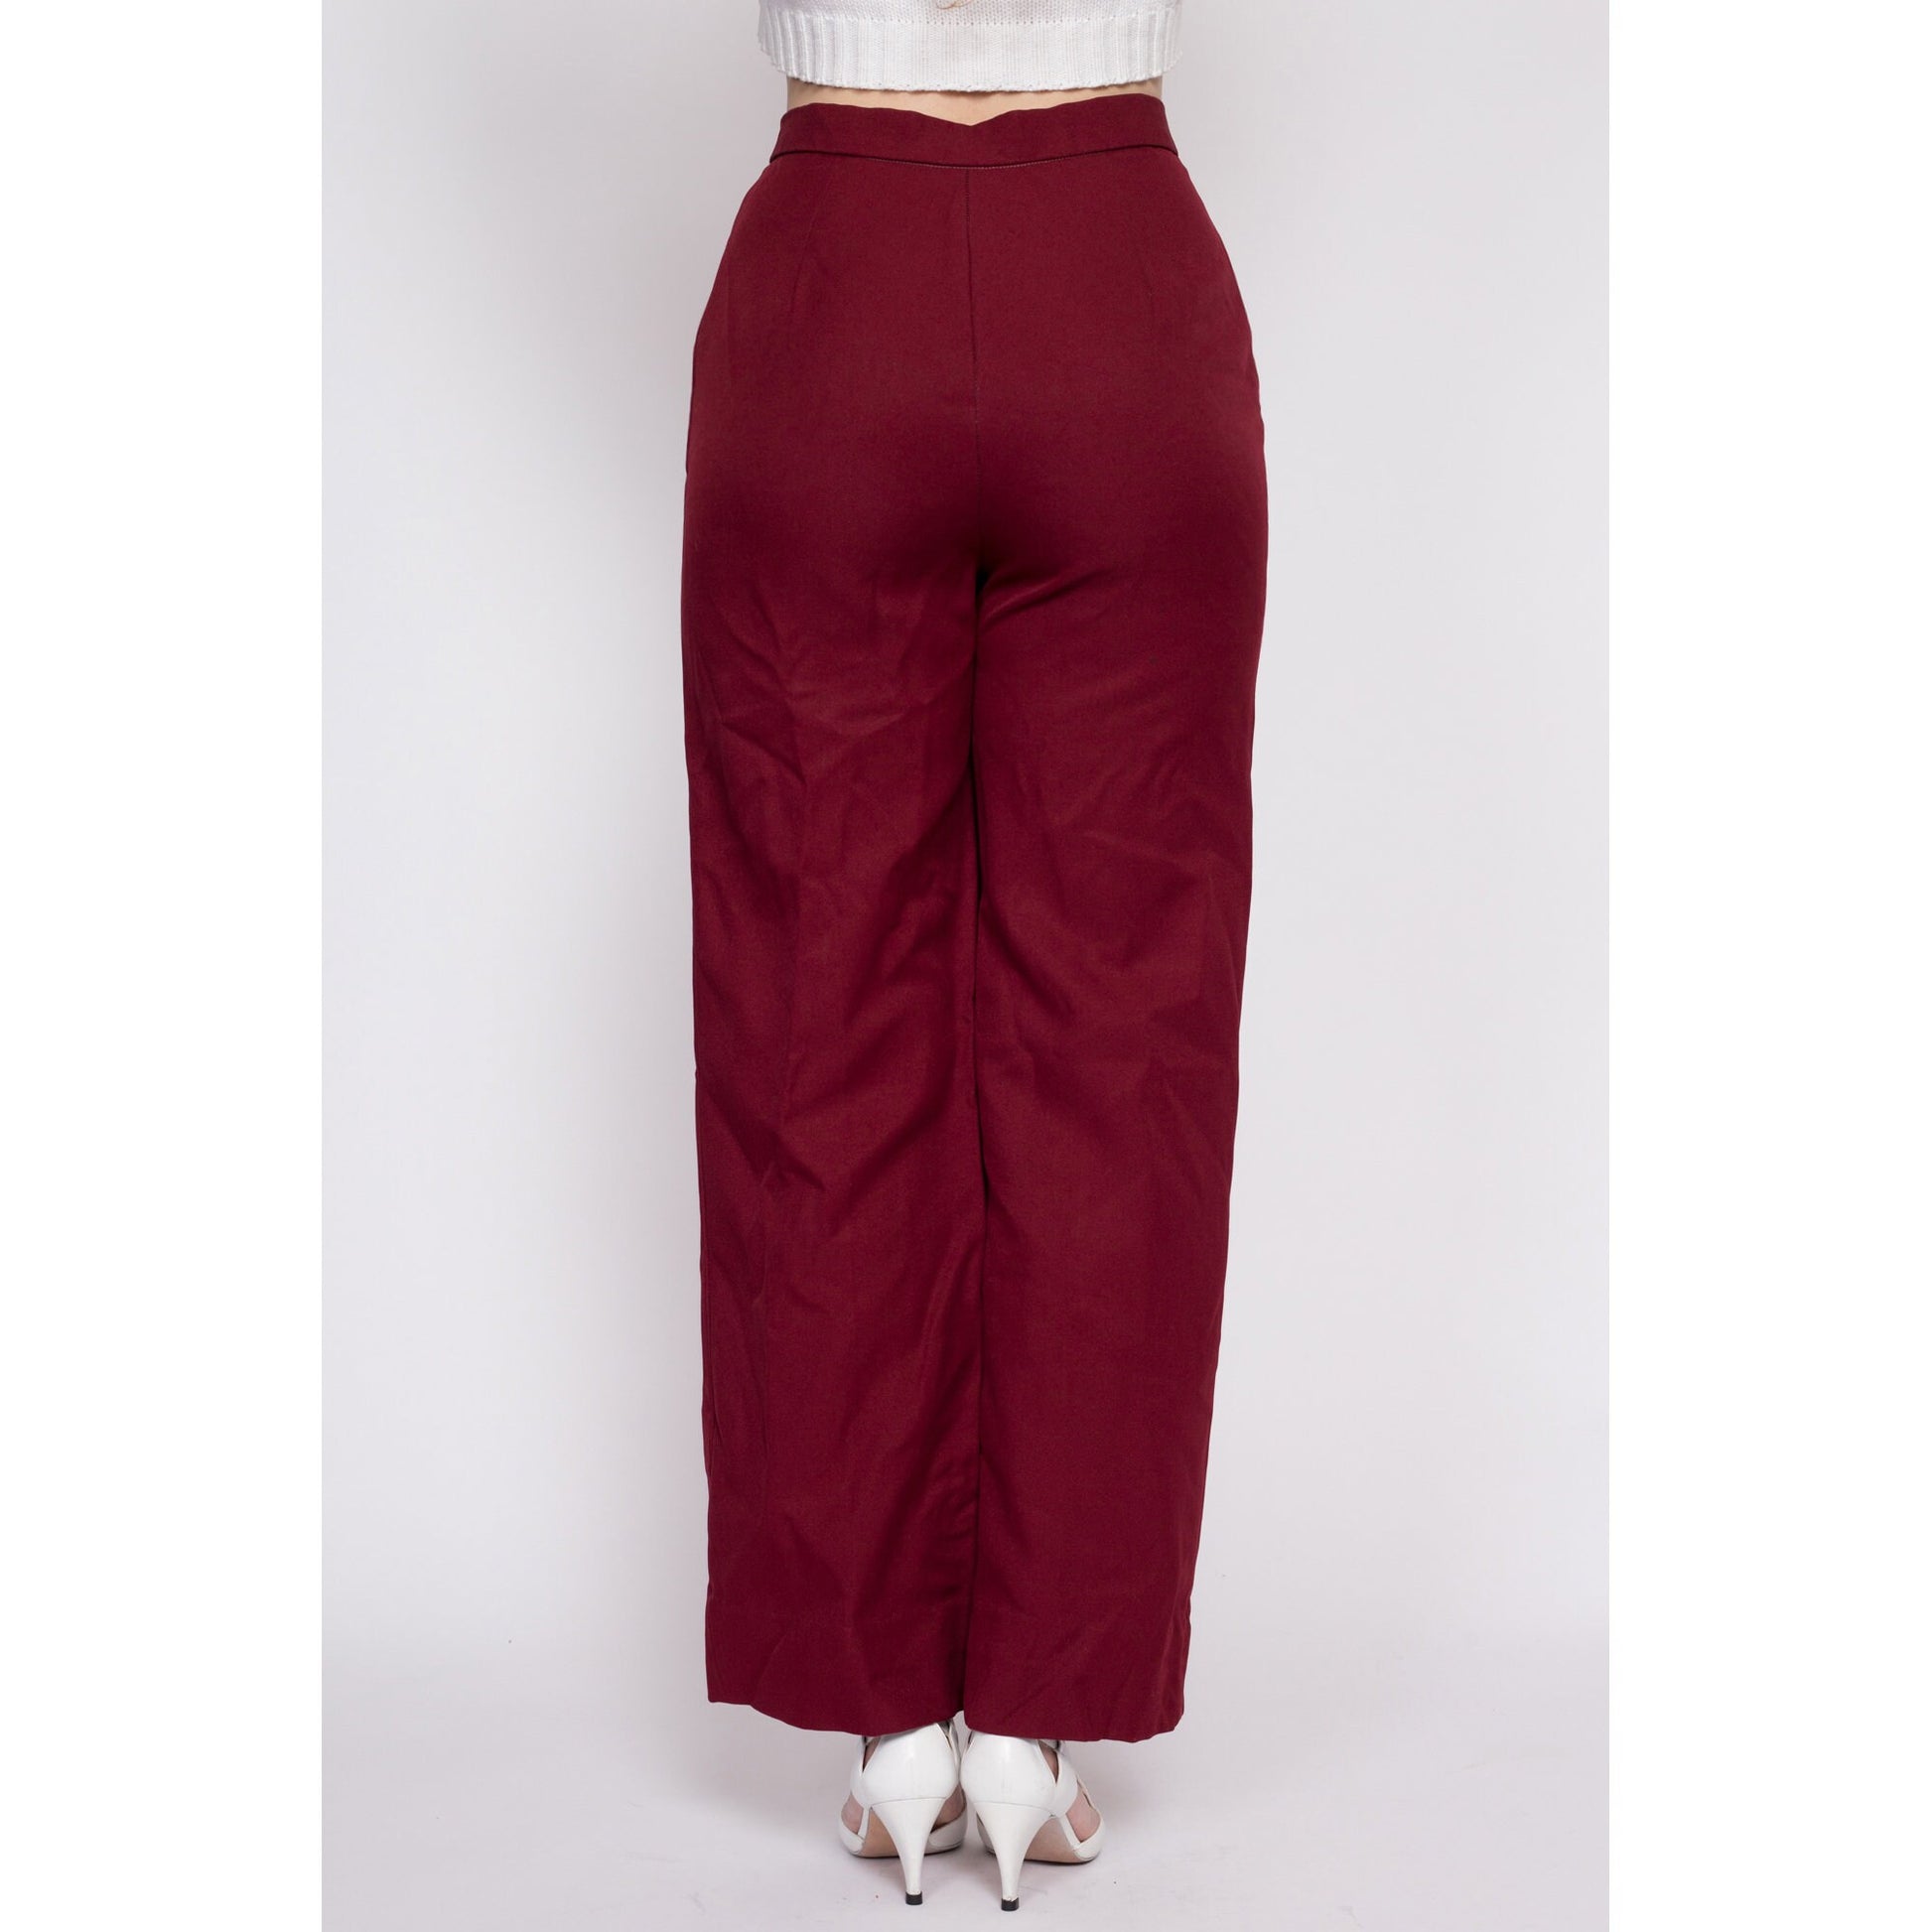 90s Burgundy Pants / Vintage High Waisted by TicketToRideVintage, €38.00